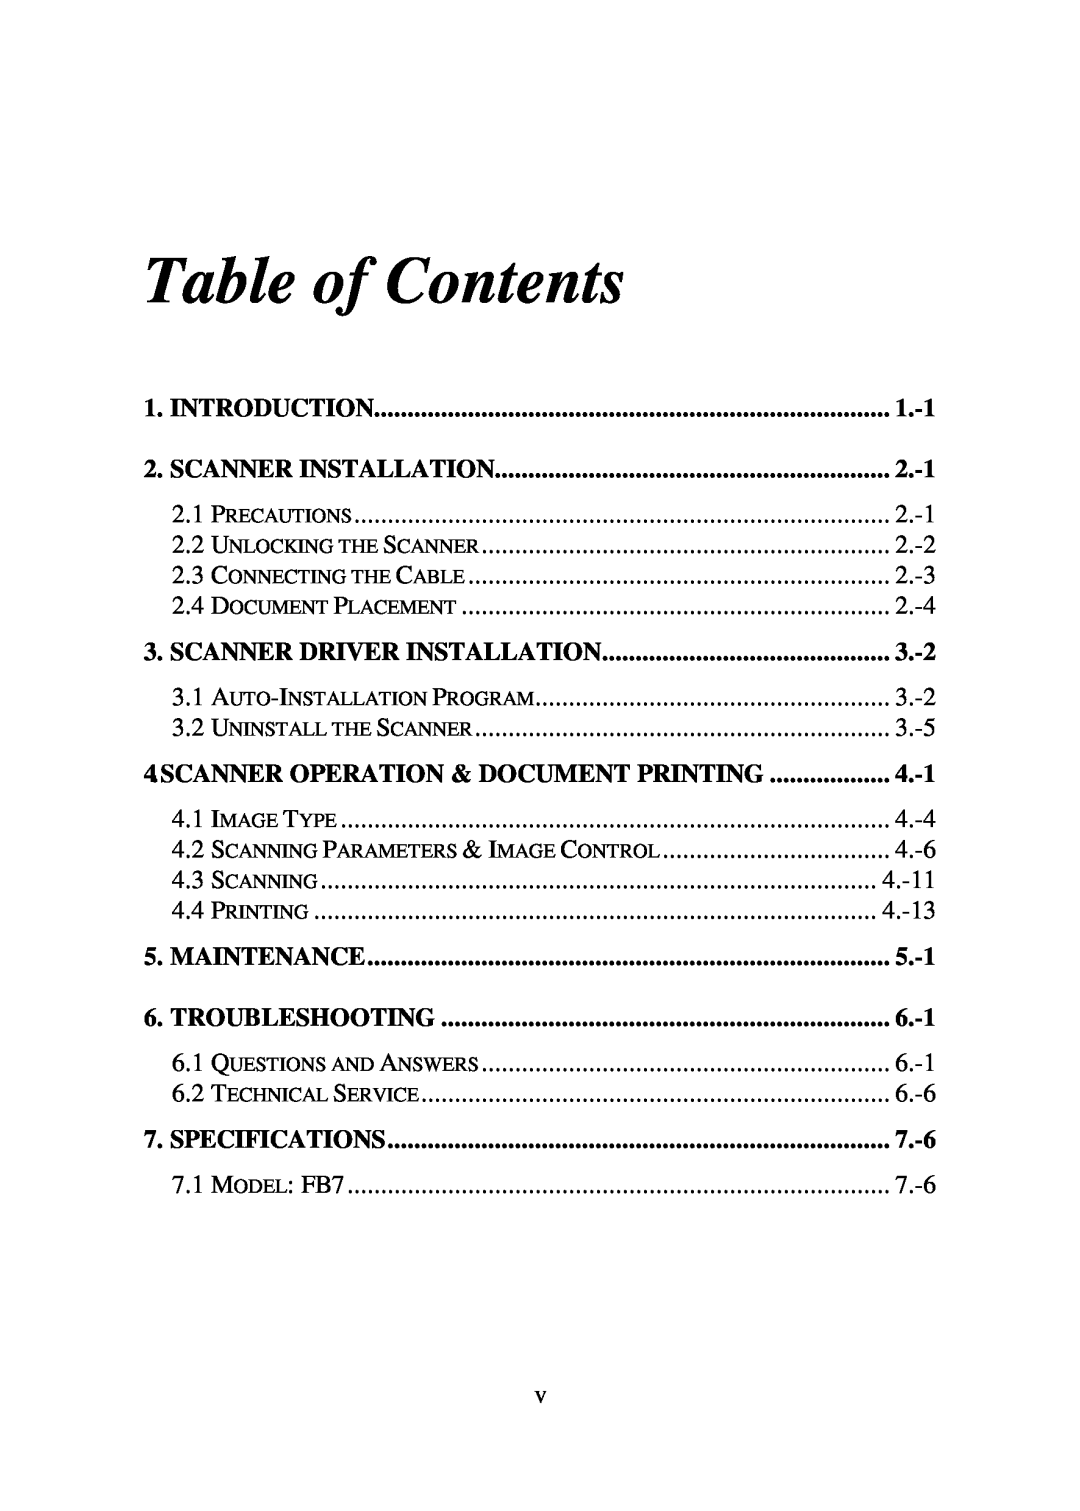 IBM Ricoh FB735 user manual Table of Contents 